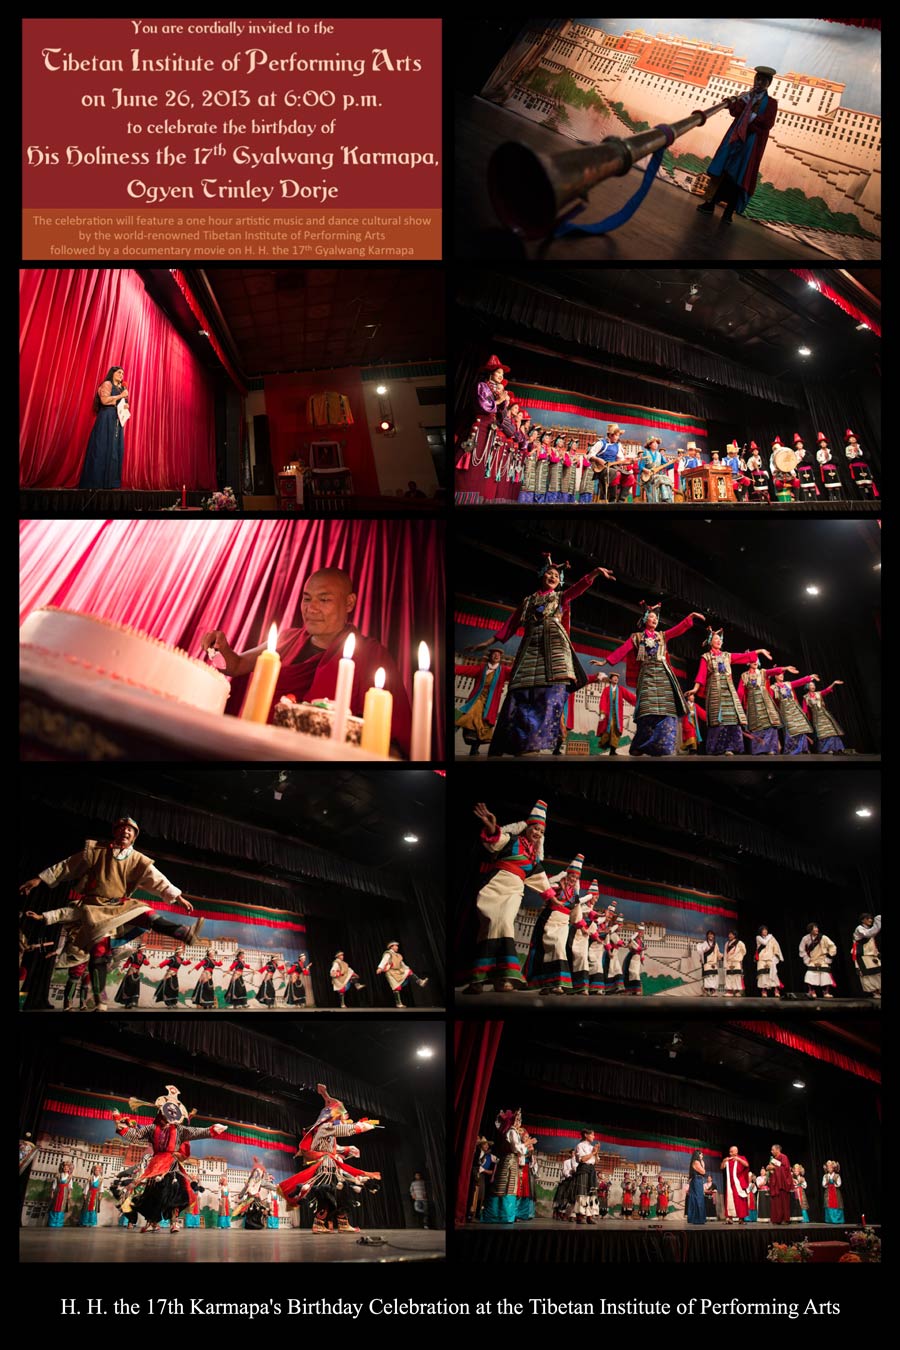 H. H, the 17th Karmapa's Birthday Celebration 2013 at the Tibetan Institute of Performing Arts